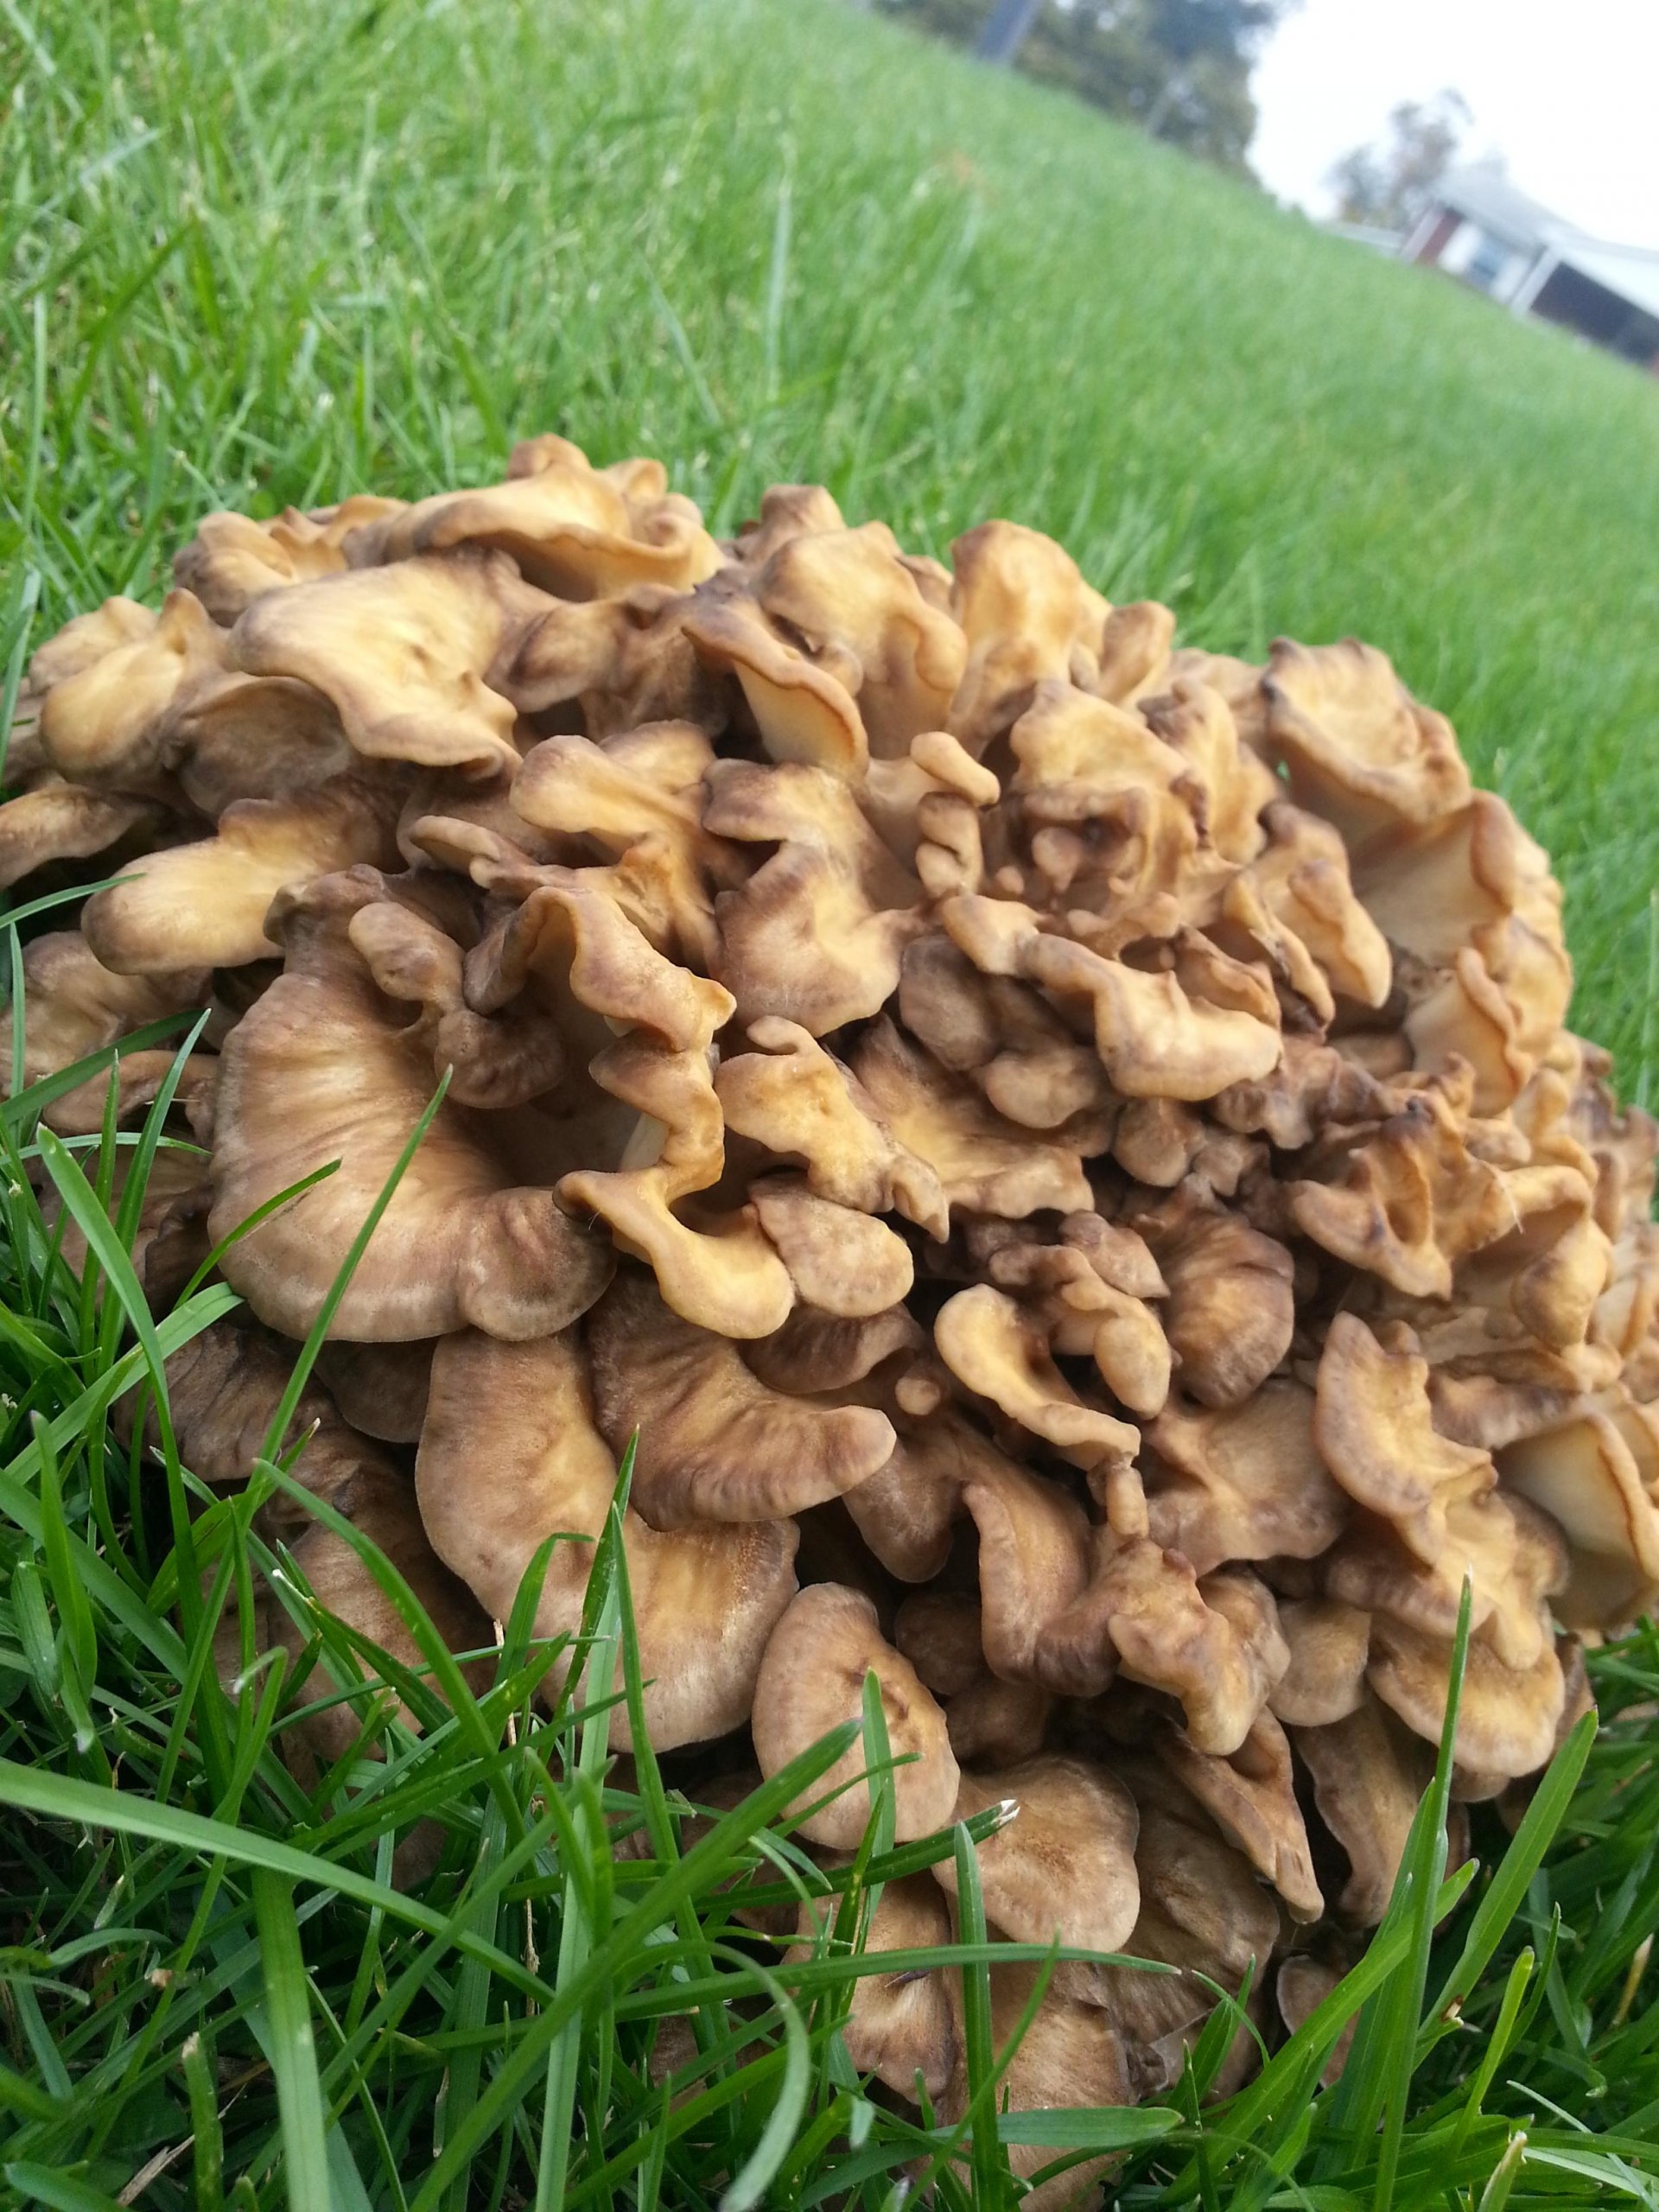 Why Do Mushrooms Grow in Your Yard